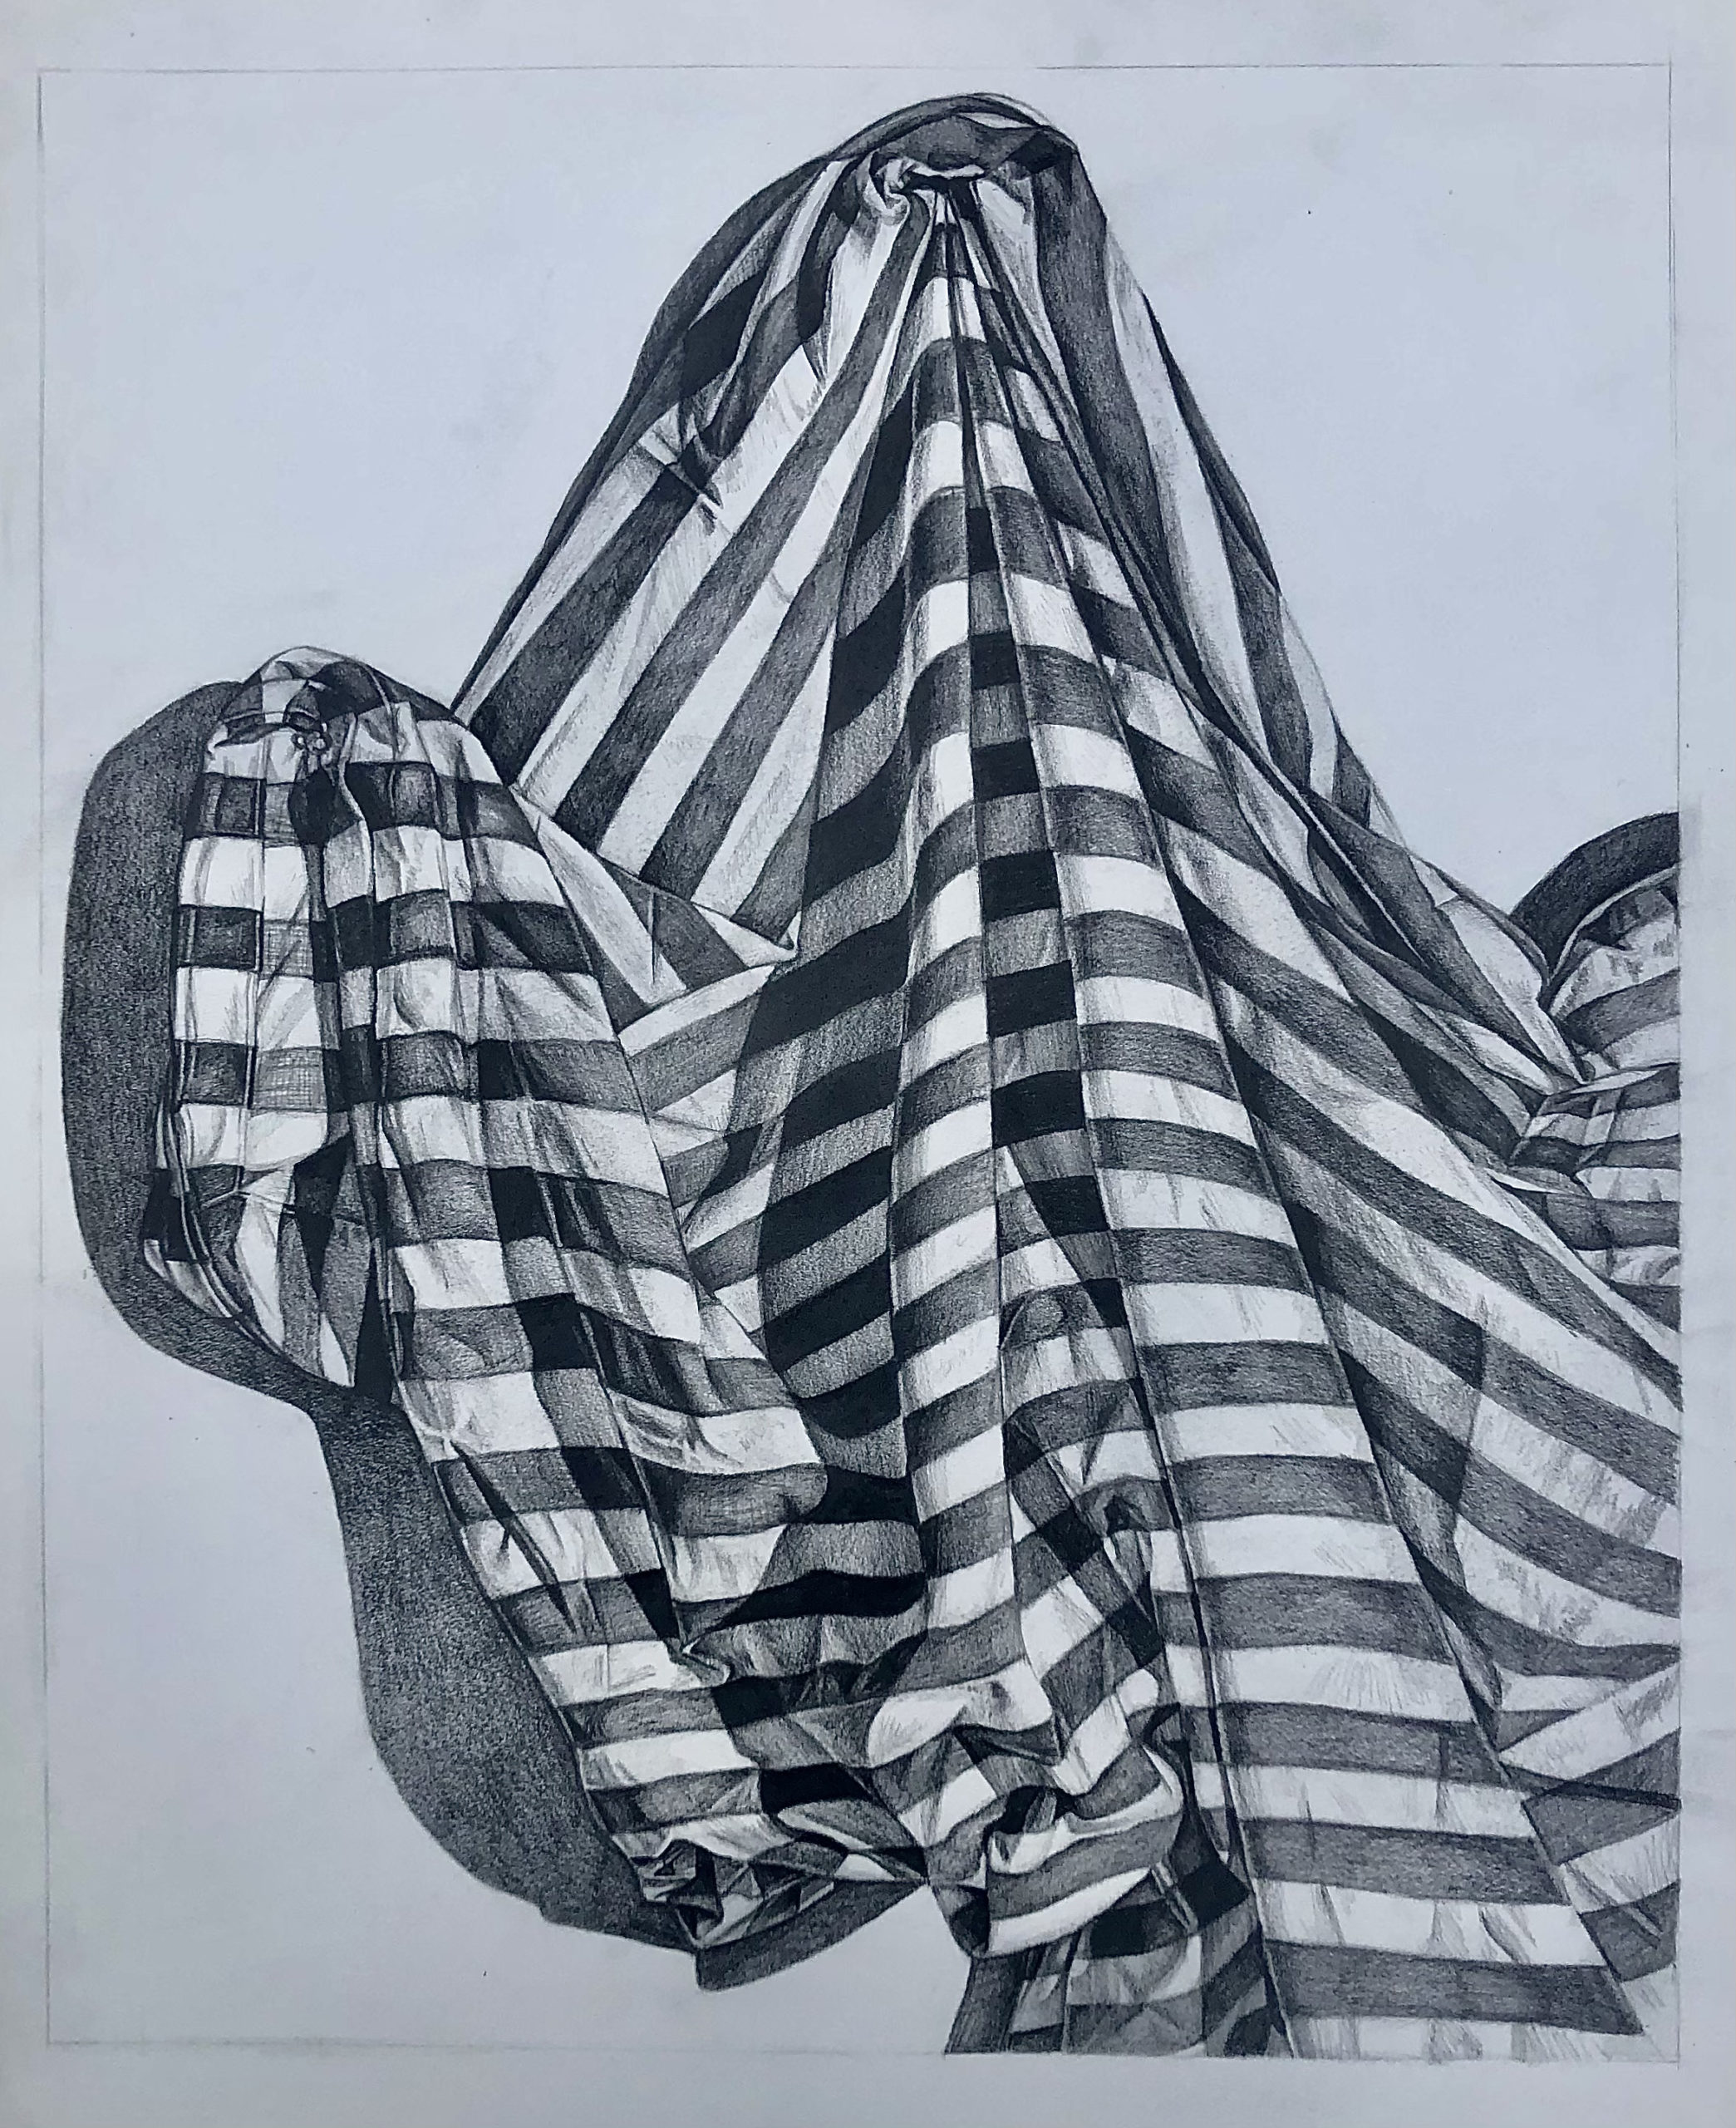 Savannah Gourley, Graphite and on Paper, 24″x18″, Striped Fabric Value/Closure Drawing, AR100 Drawing I, Spring 2020